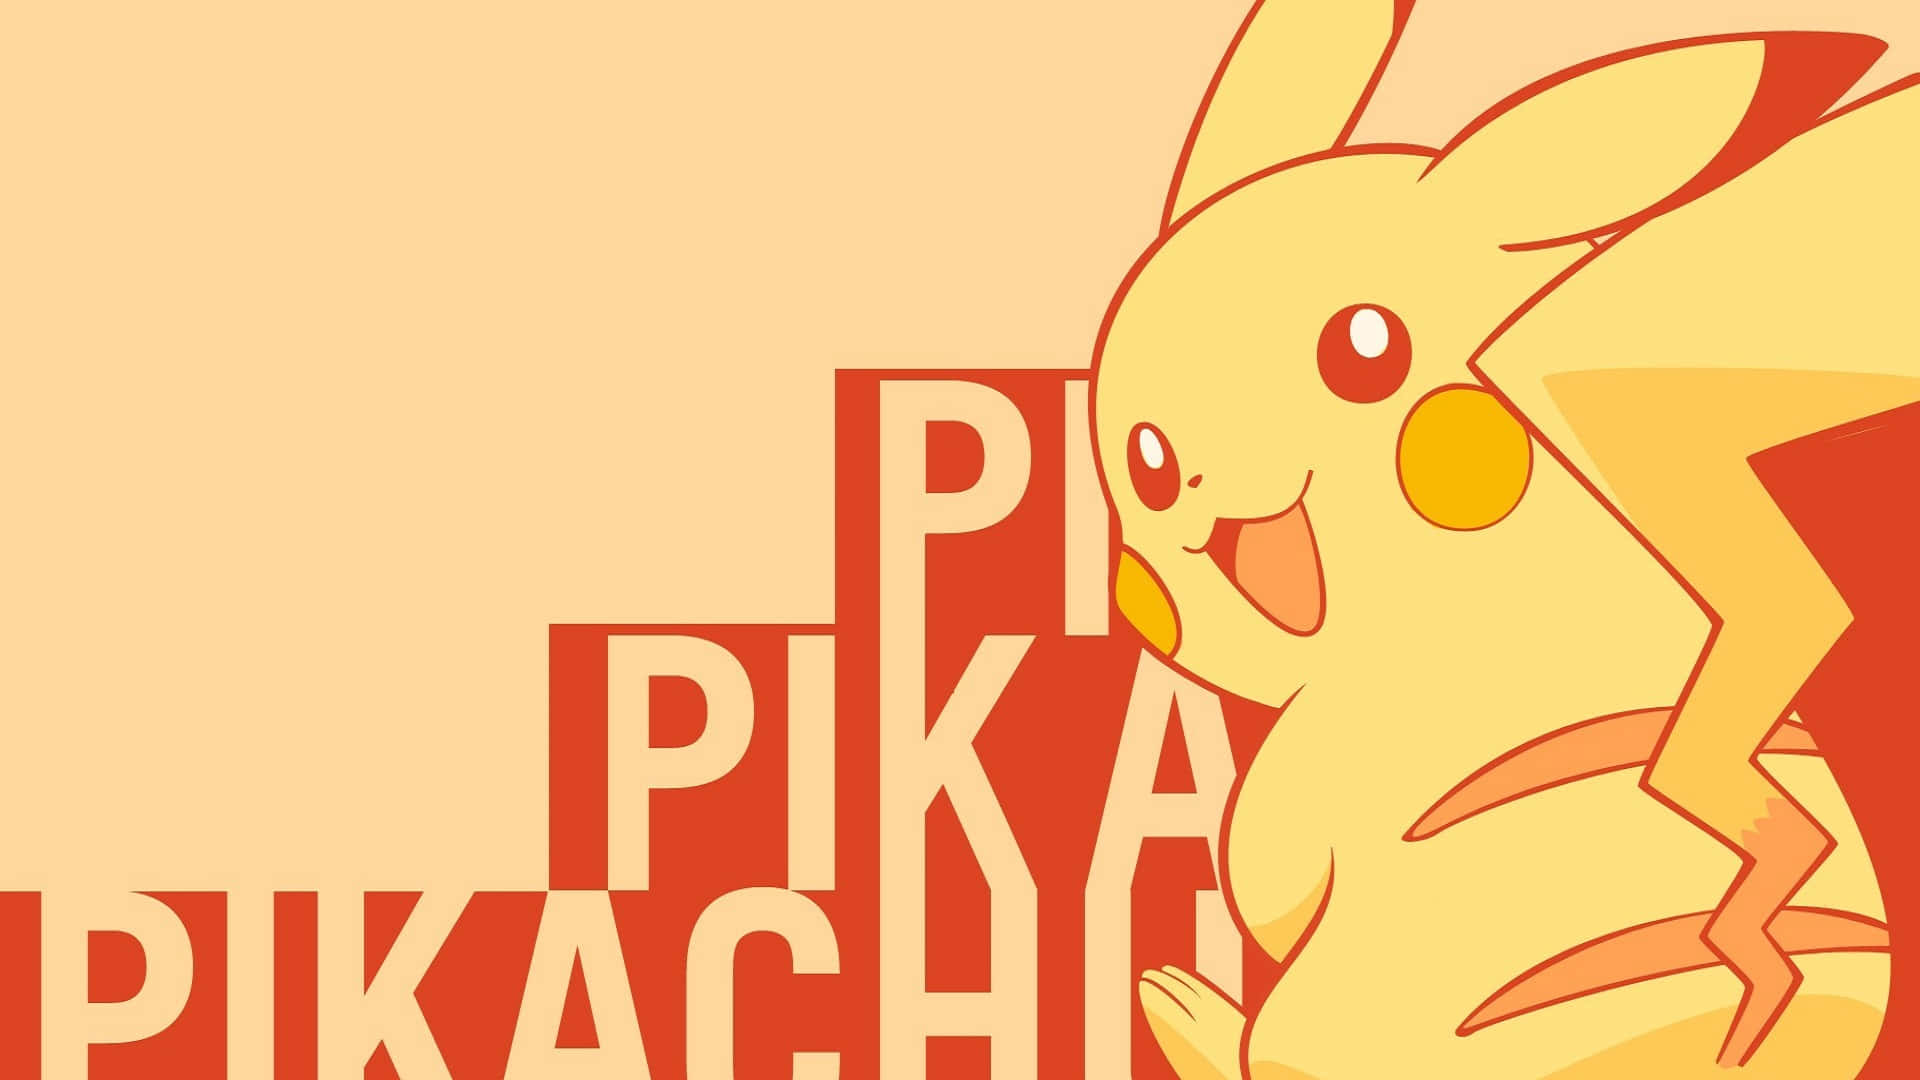 Enter the world of Pikachu!